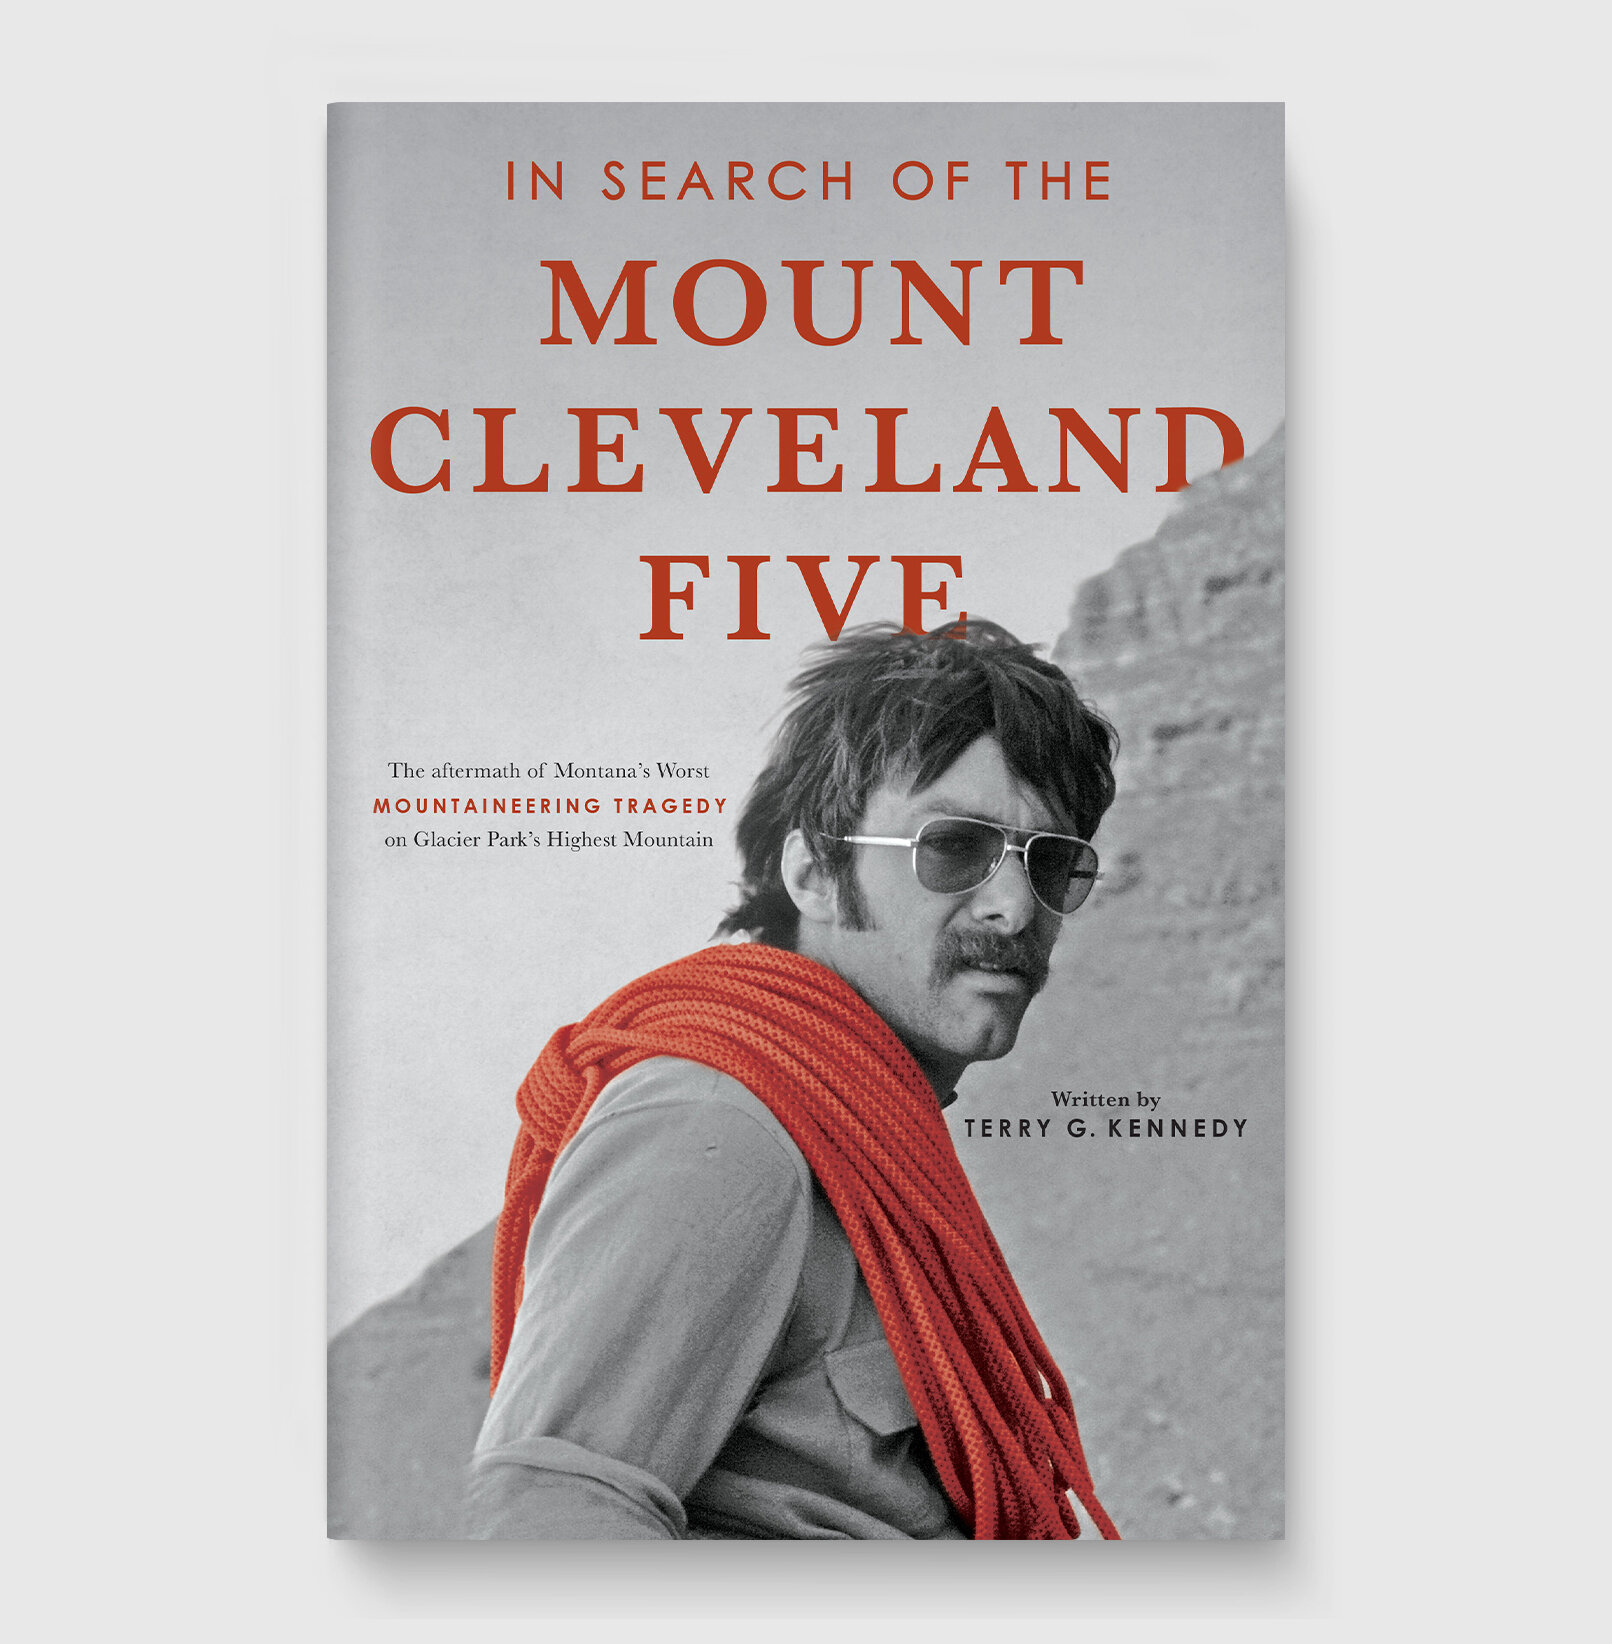 In Search of the Mount Cleveland Five